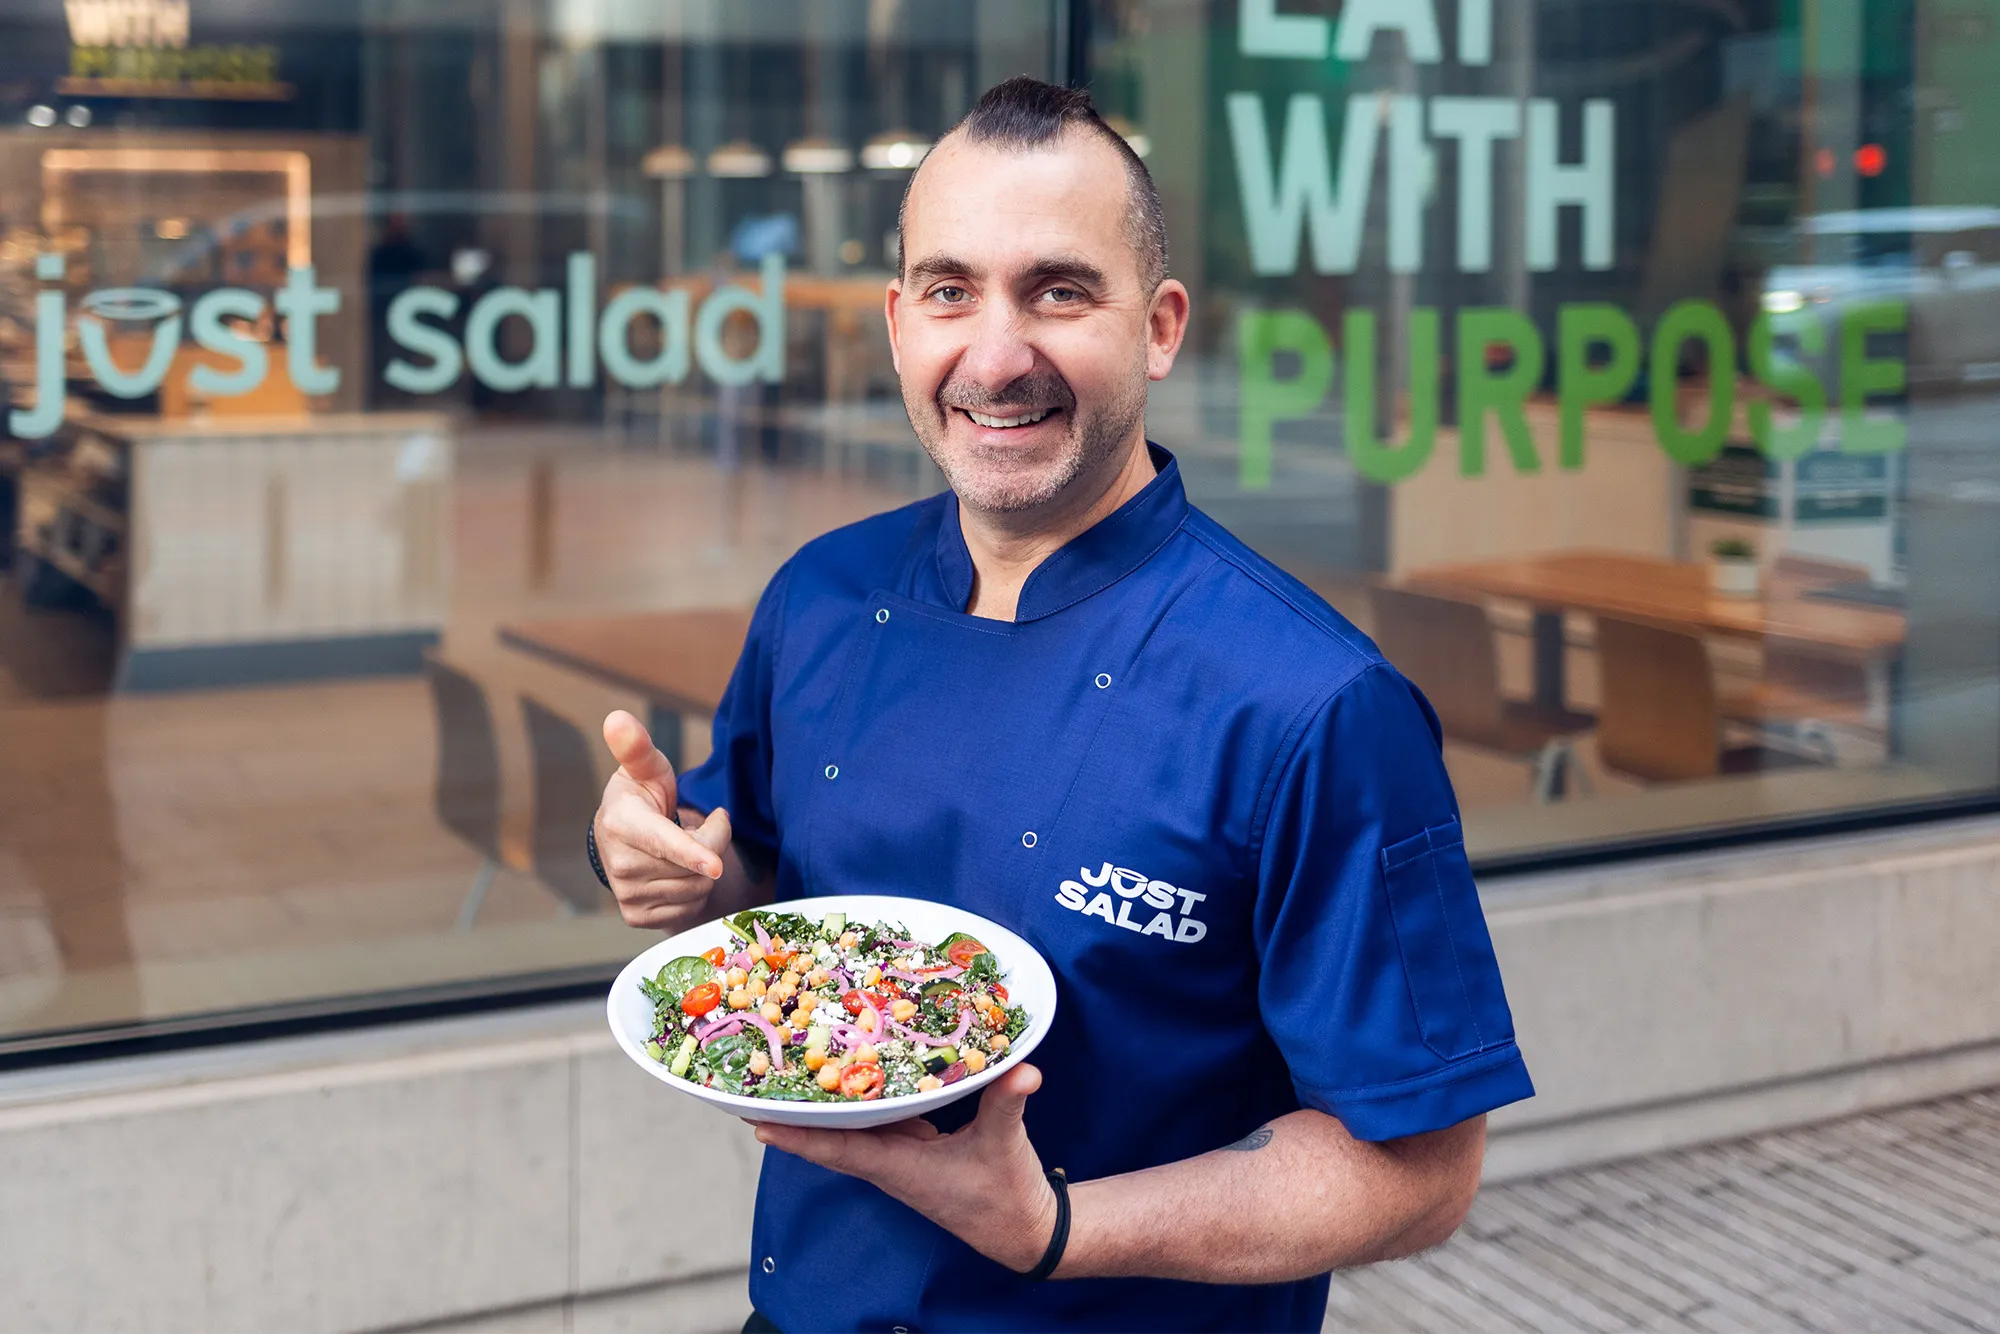 Chef Marc Forgione holding a salad in front of a Just Salad location